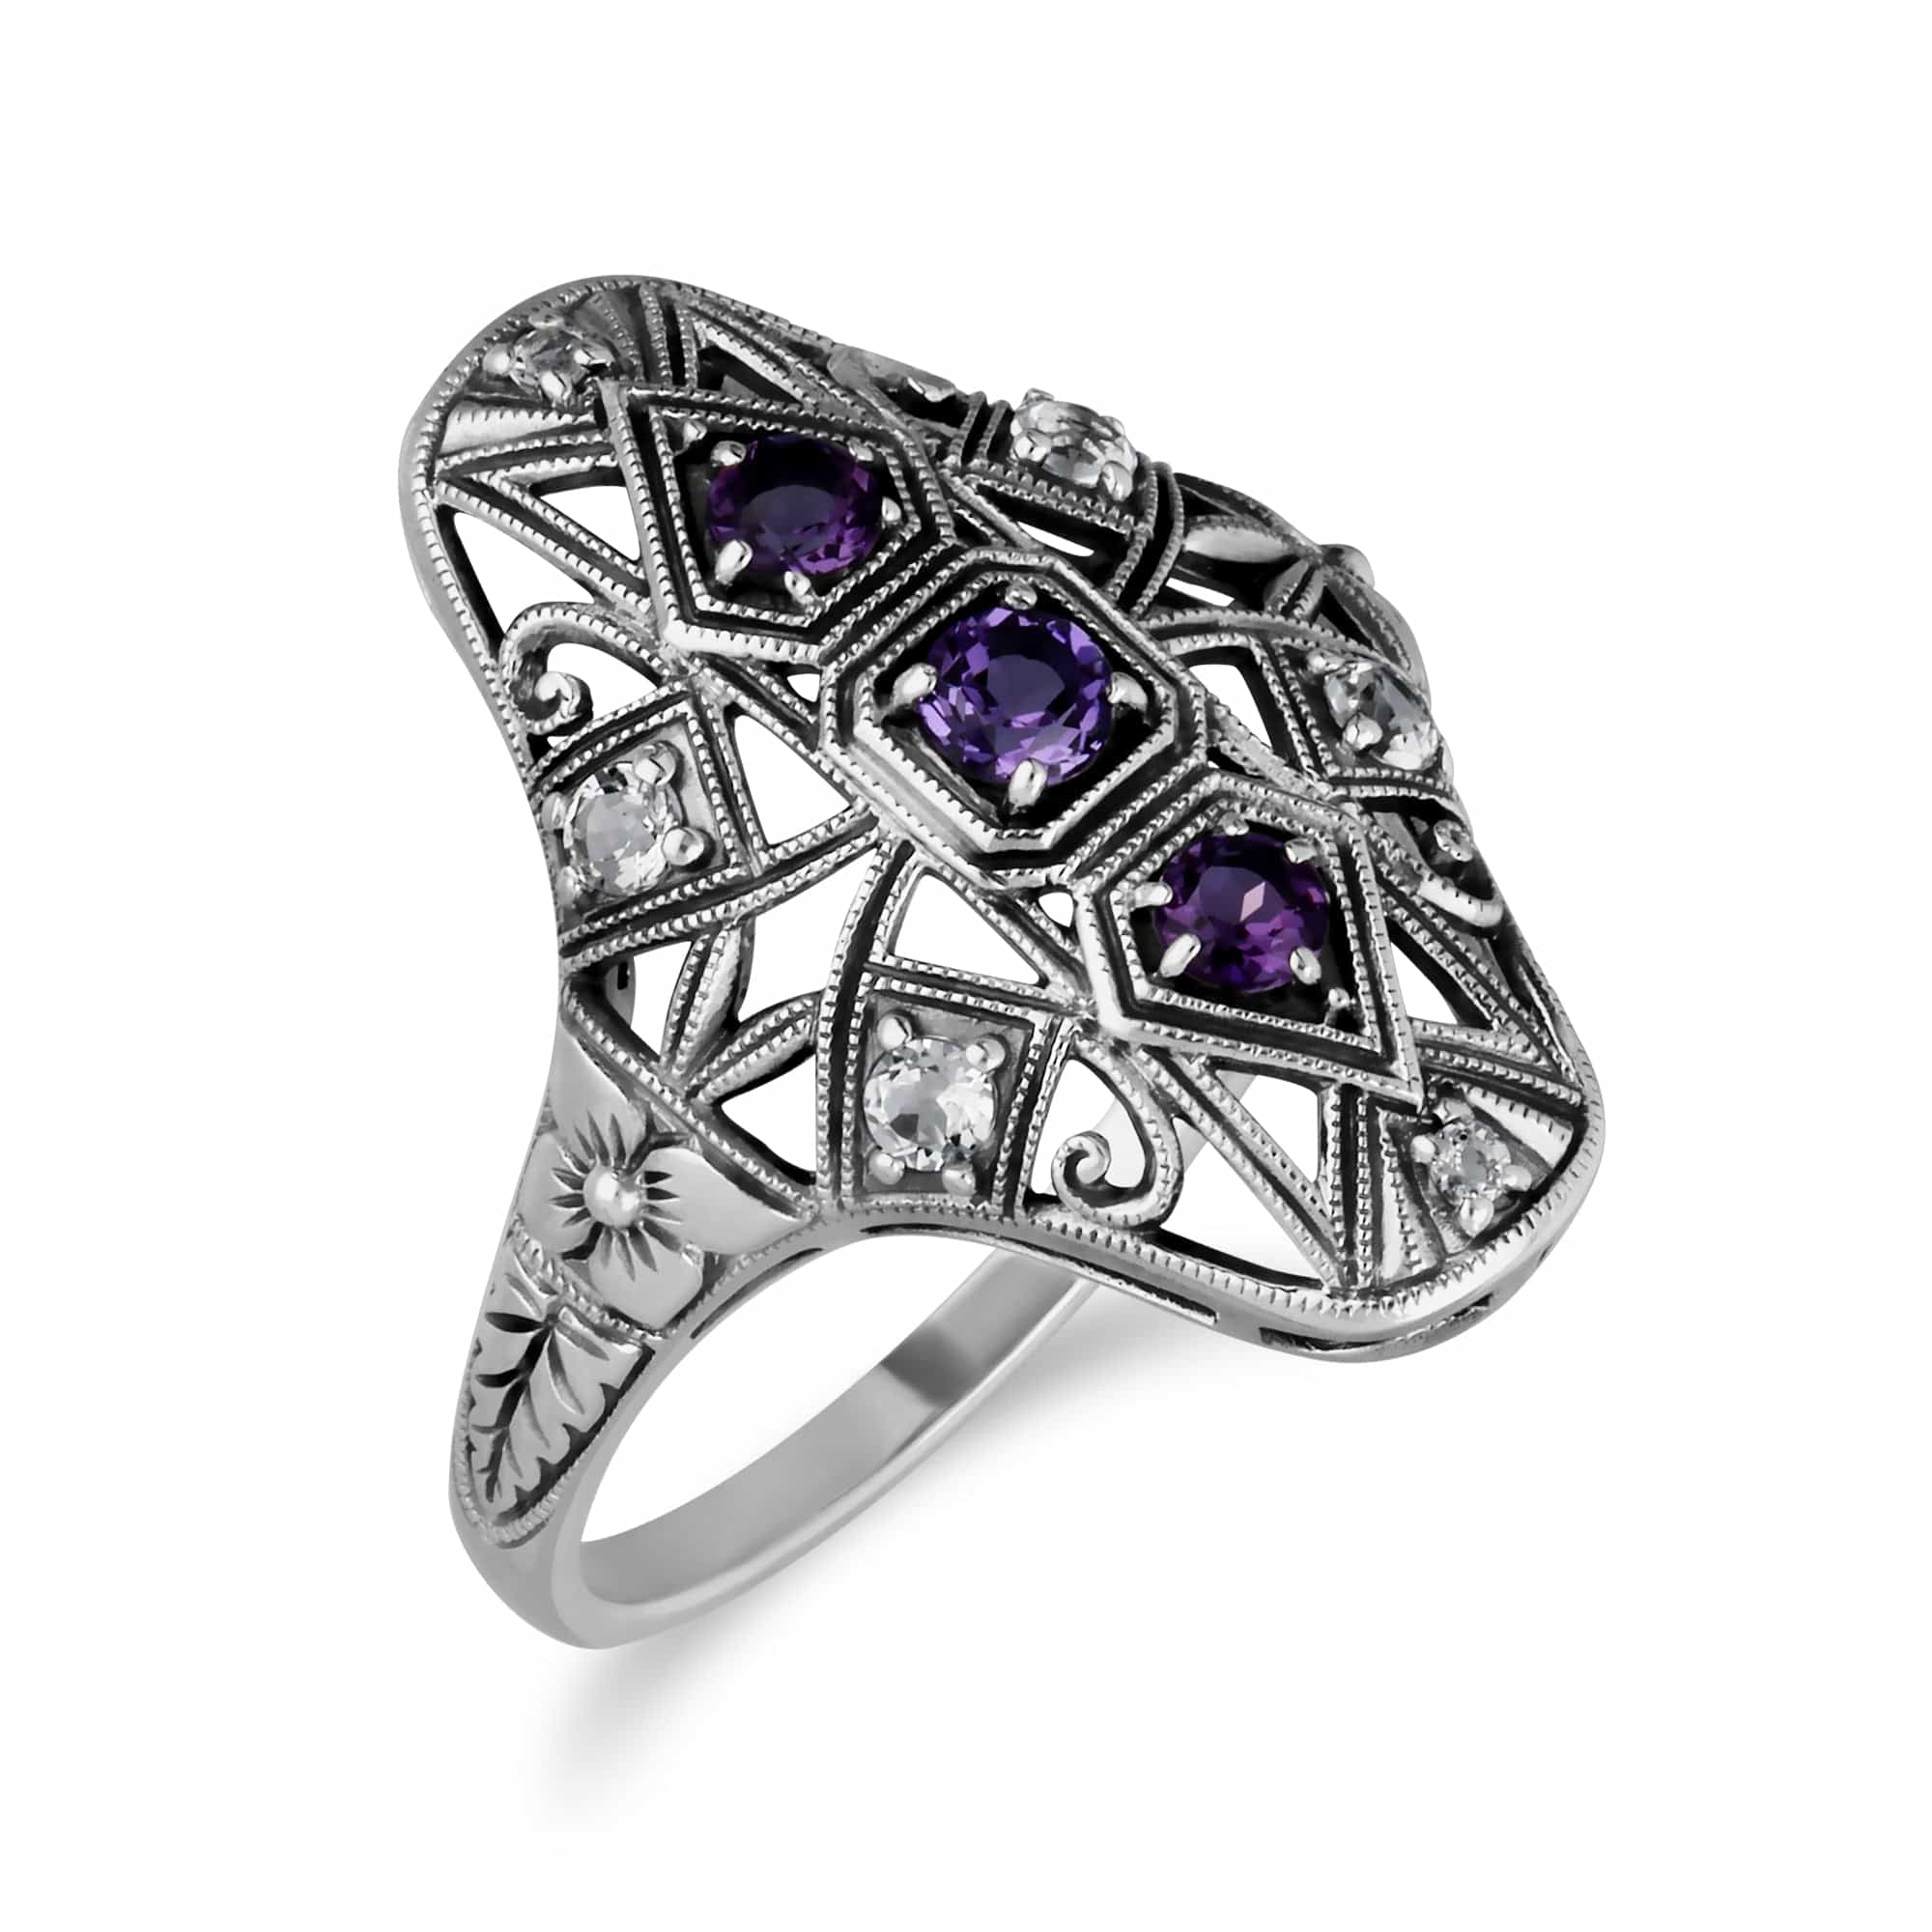 241R210602925 Art Nouveau Style Round Amethyst & White Topaz Statement Ring in 925 Sterling Silver 2